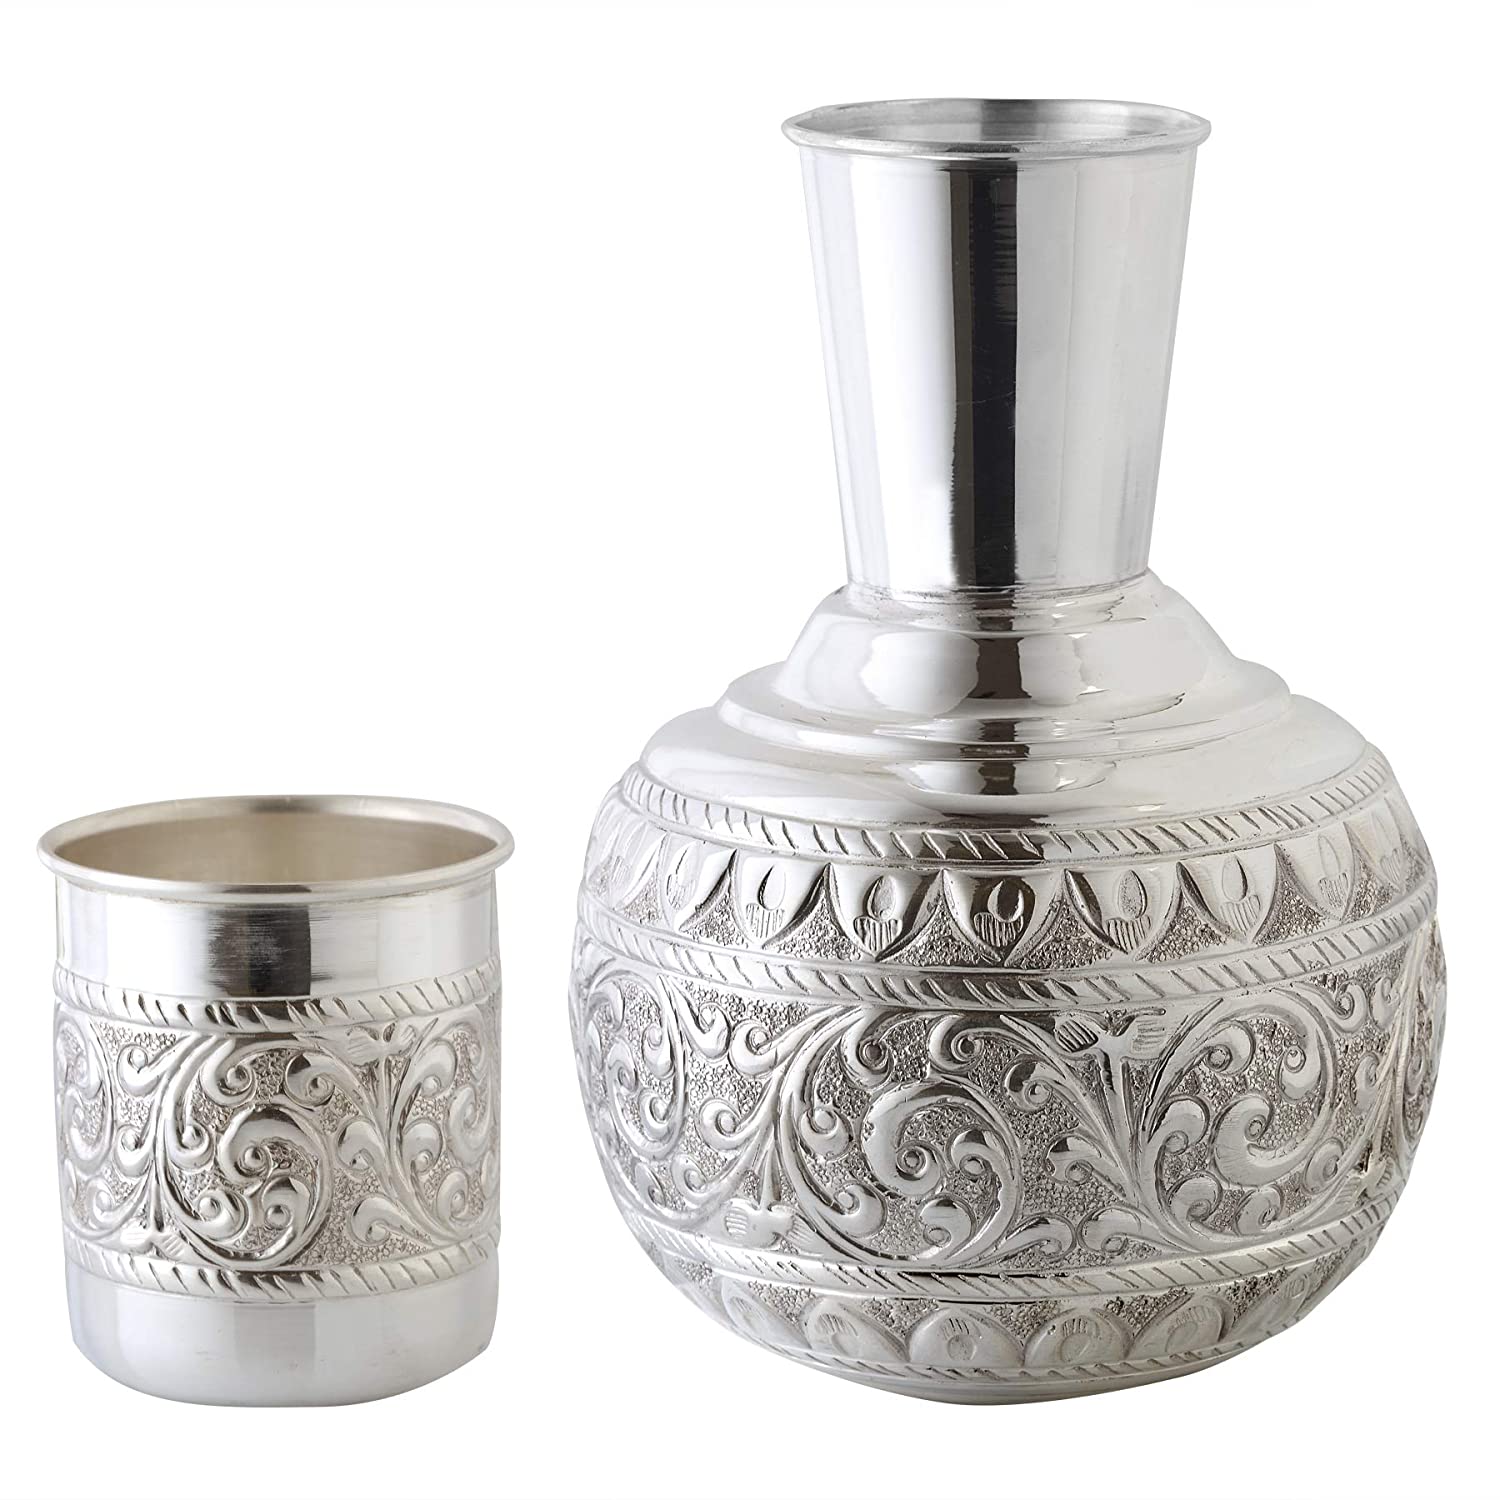 Pure Silver Gift Items Below Rs. 20,000 – tagged 